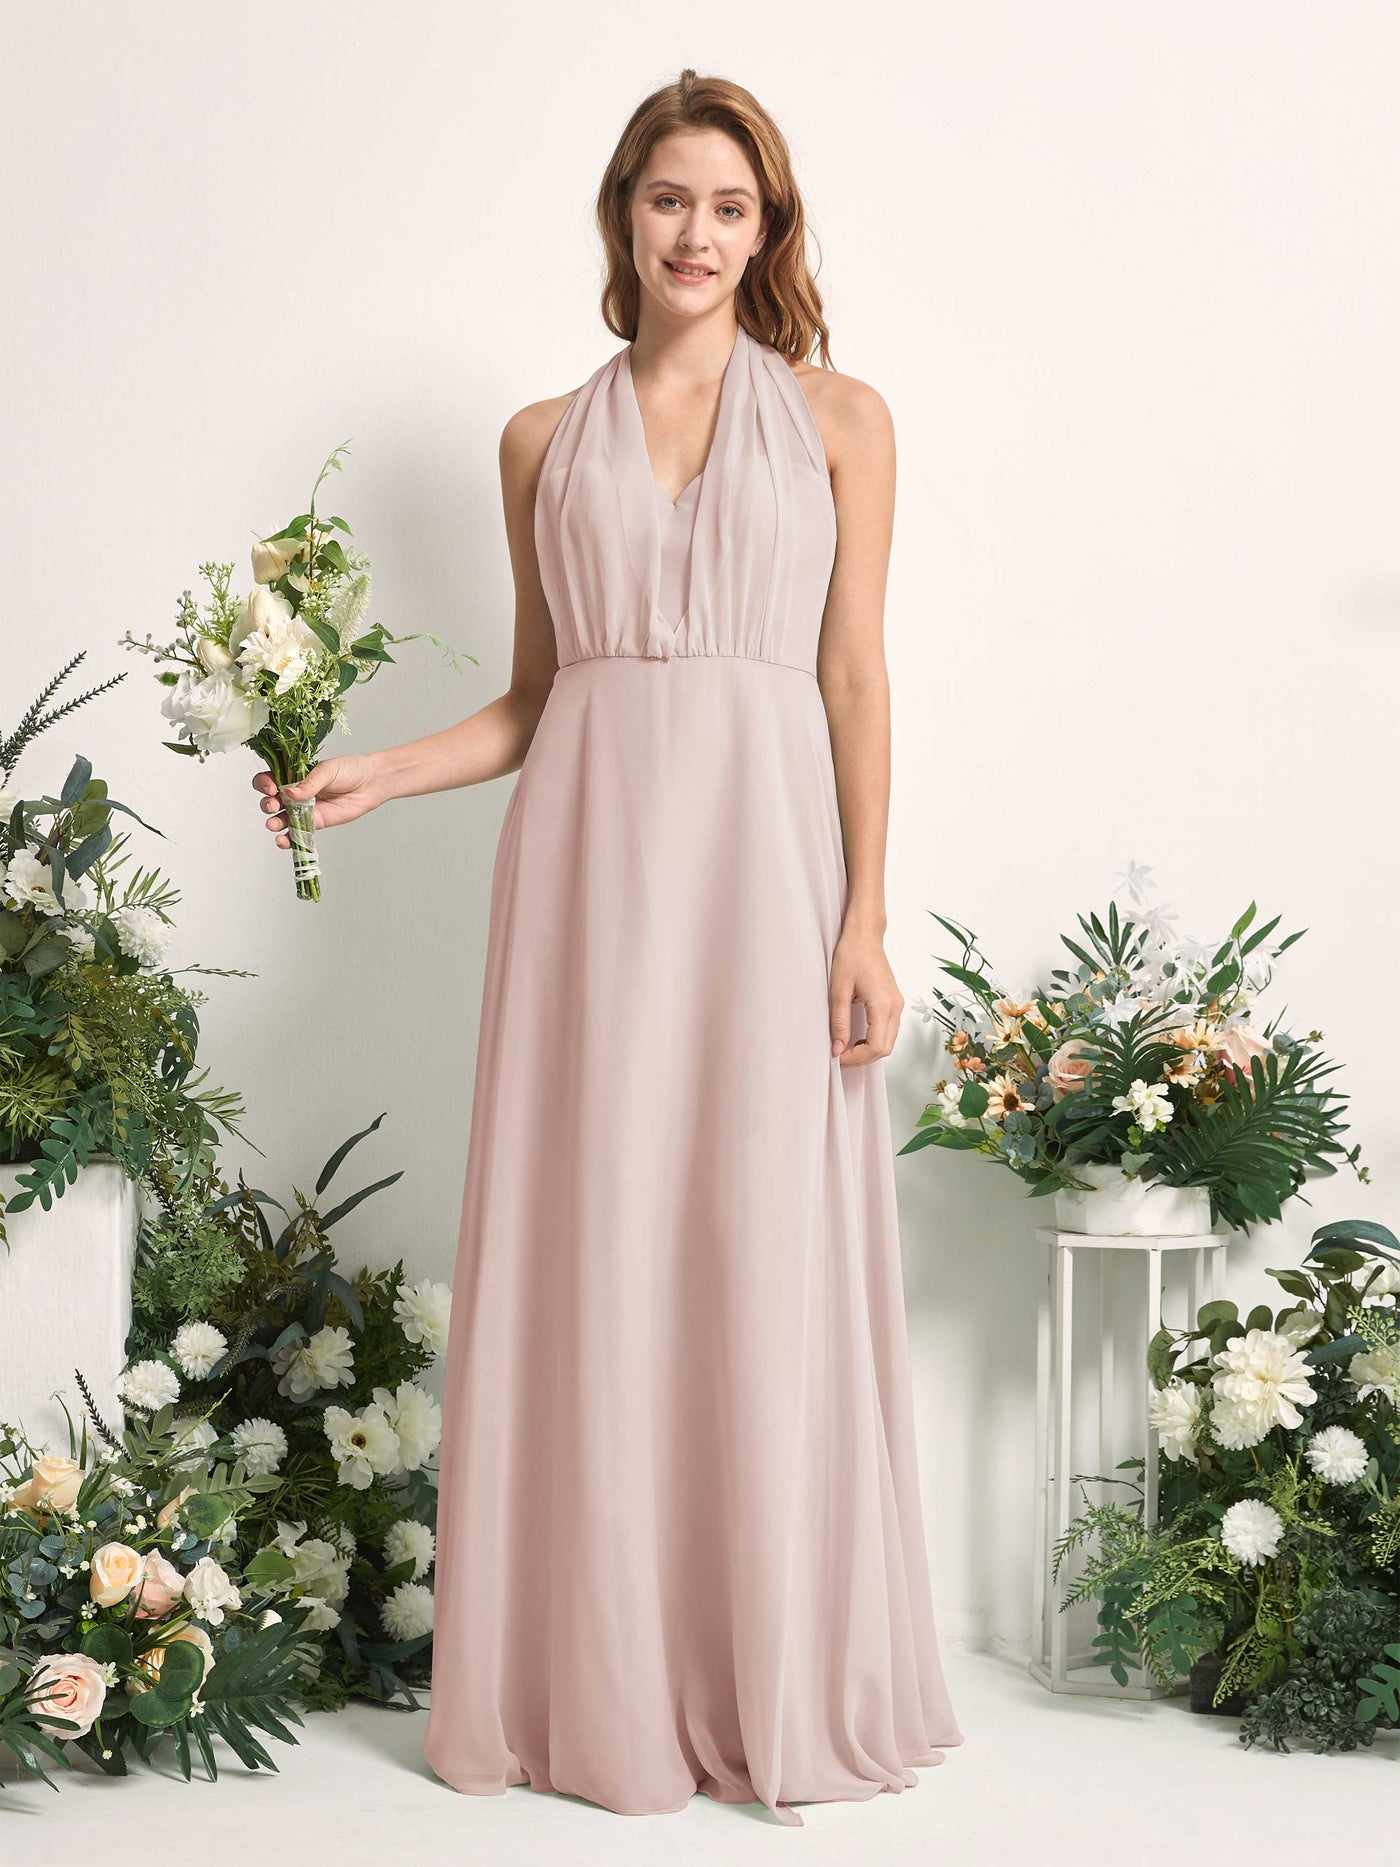 Biscotti Bridesmaid Dresses Bridesmaid Dress A-line Chiffon Halter Full Length Short Sleeves Wedding Party Dress (81226335)#color_biscotti